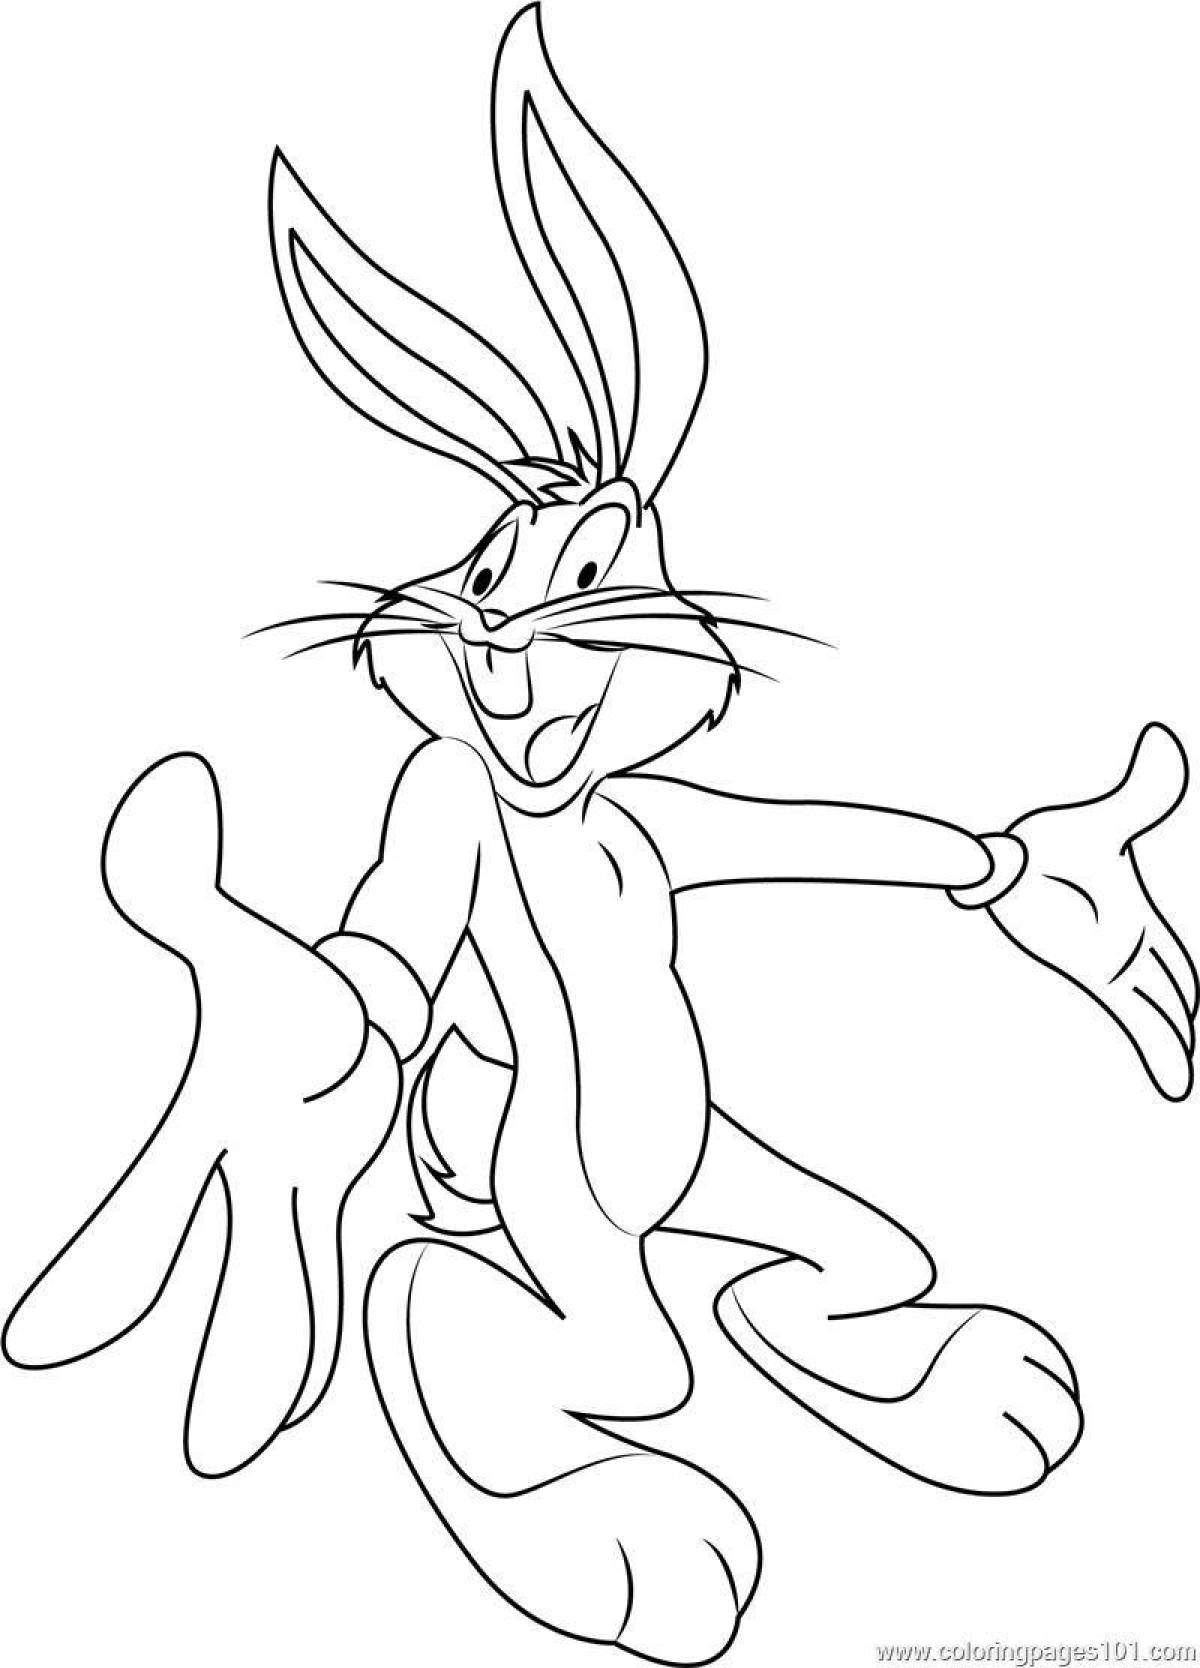 Coloring live bugs bunny